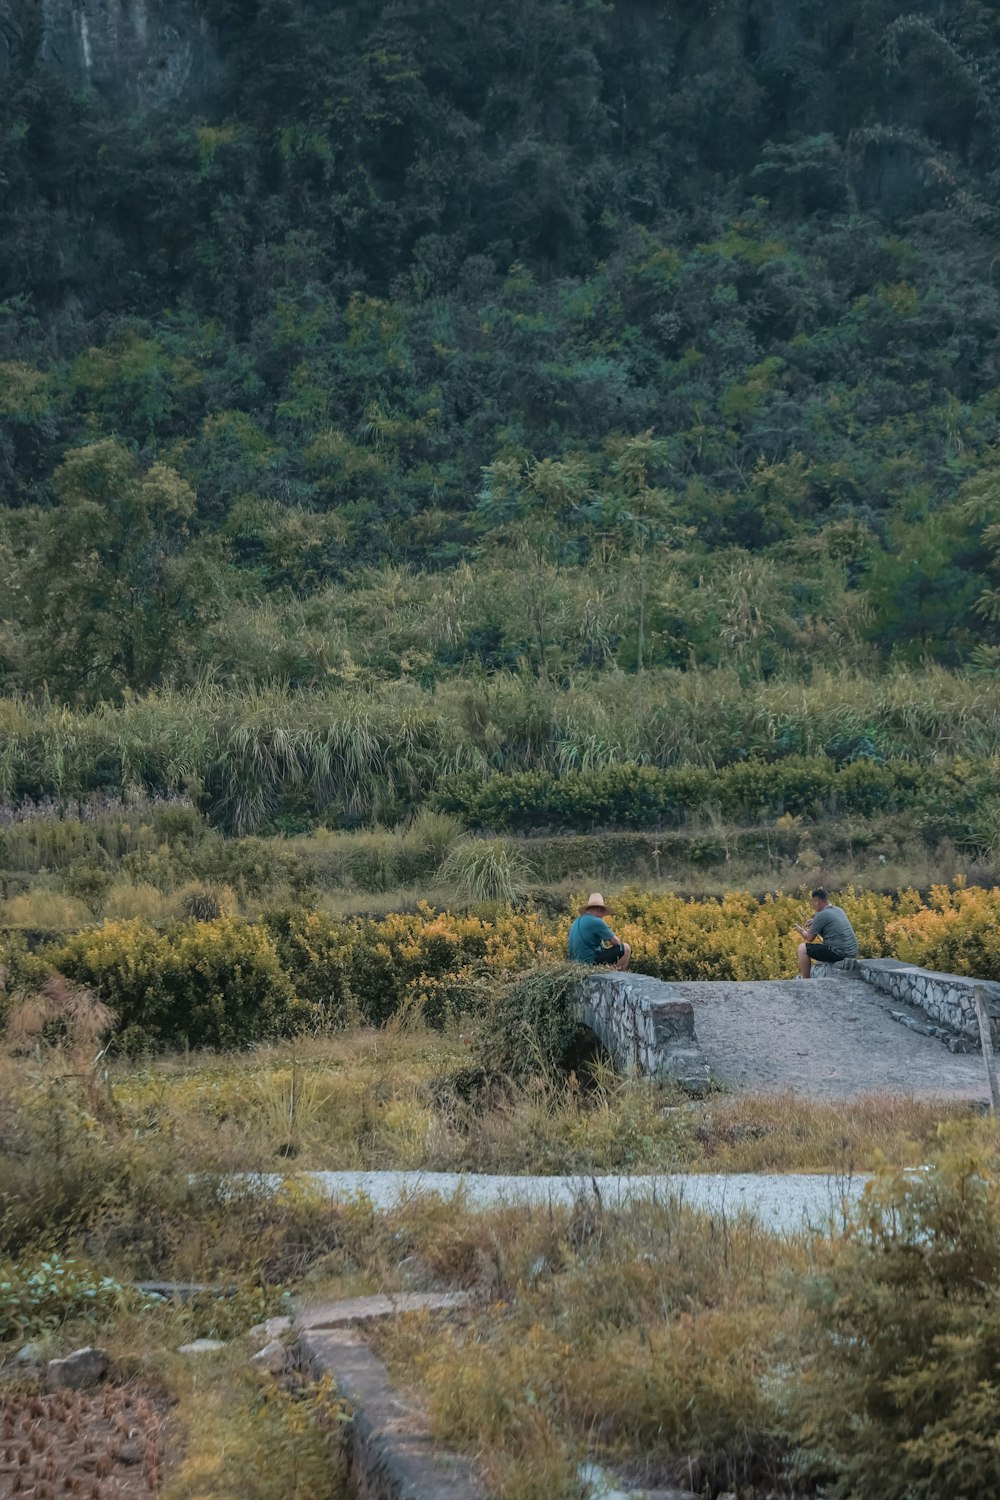 a couple of people sitting on a bench in a field